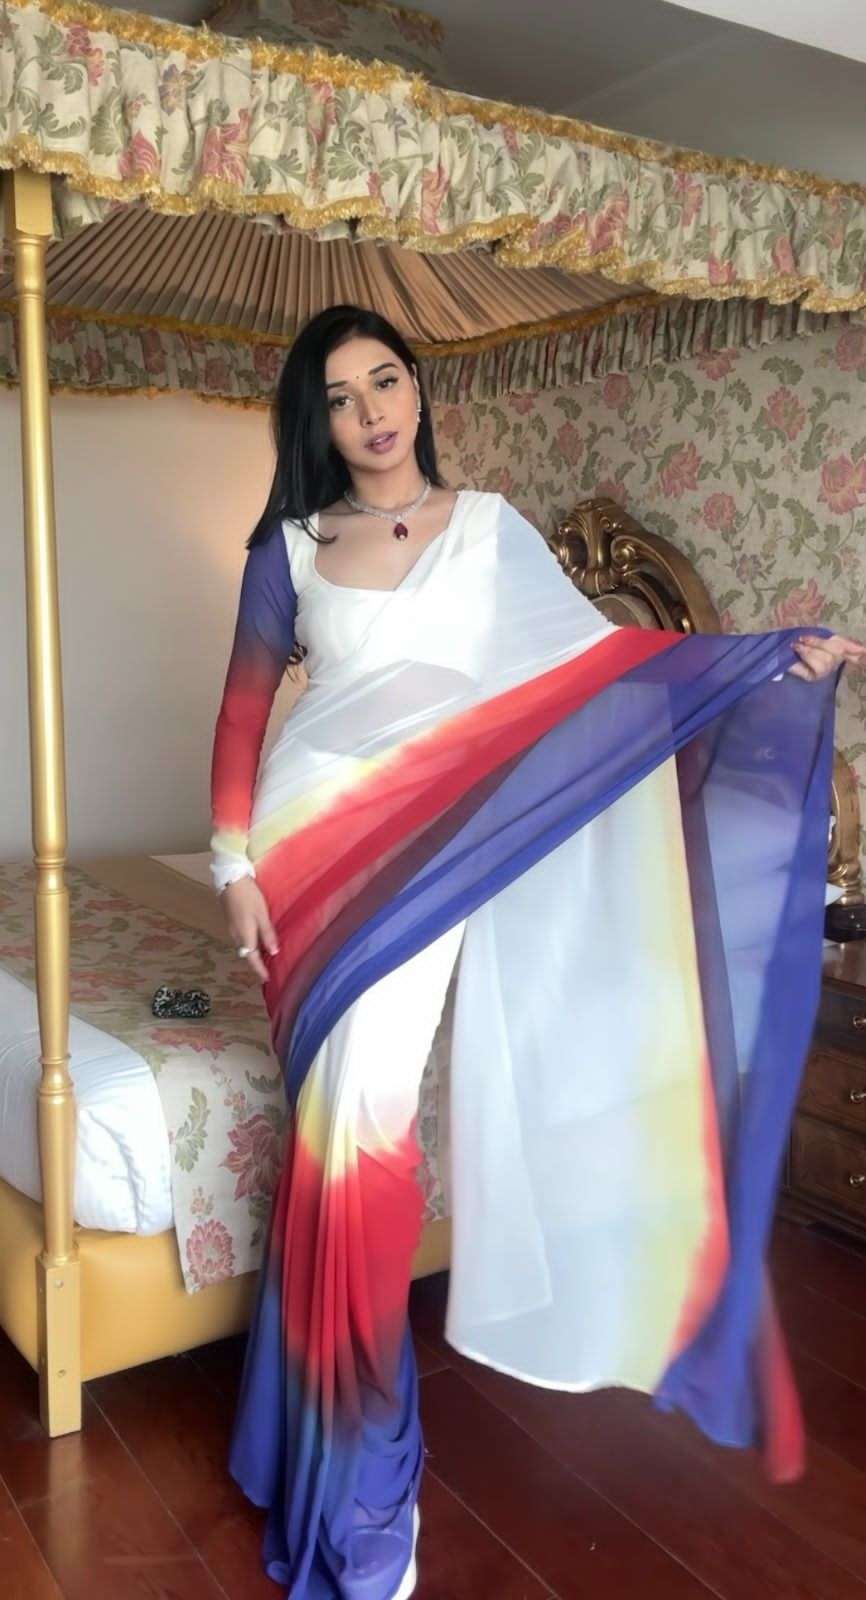 Buy Wear in a Moment saree, Handloom Khadi Cotton plain saree with border,  running blouse at Amazon.in